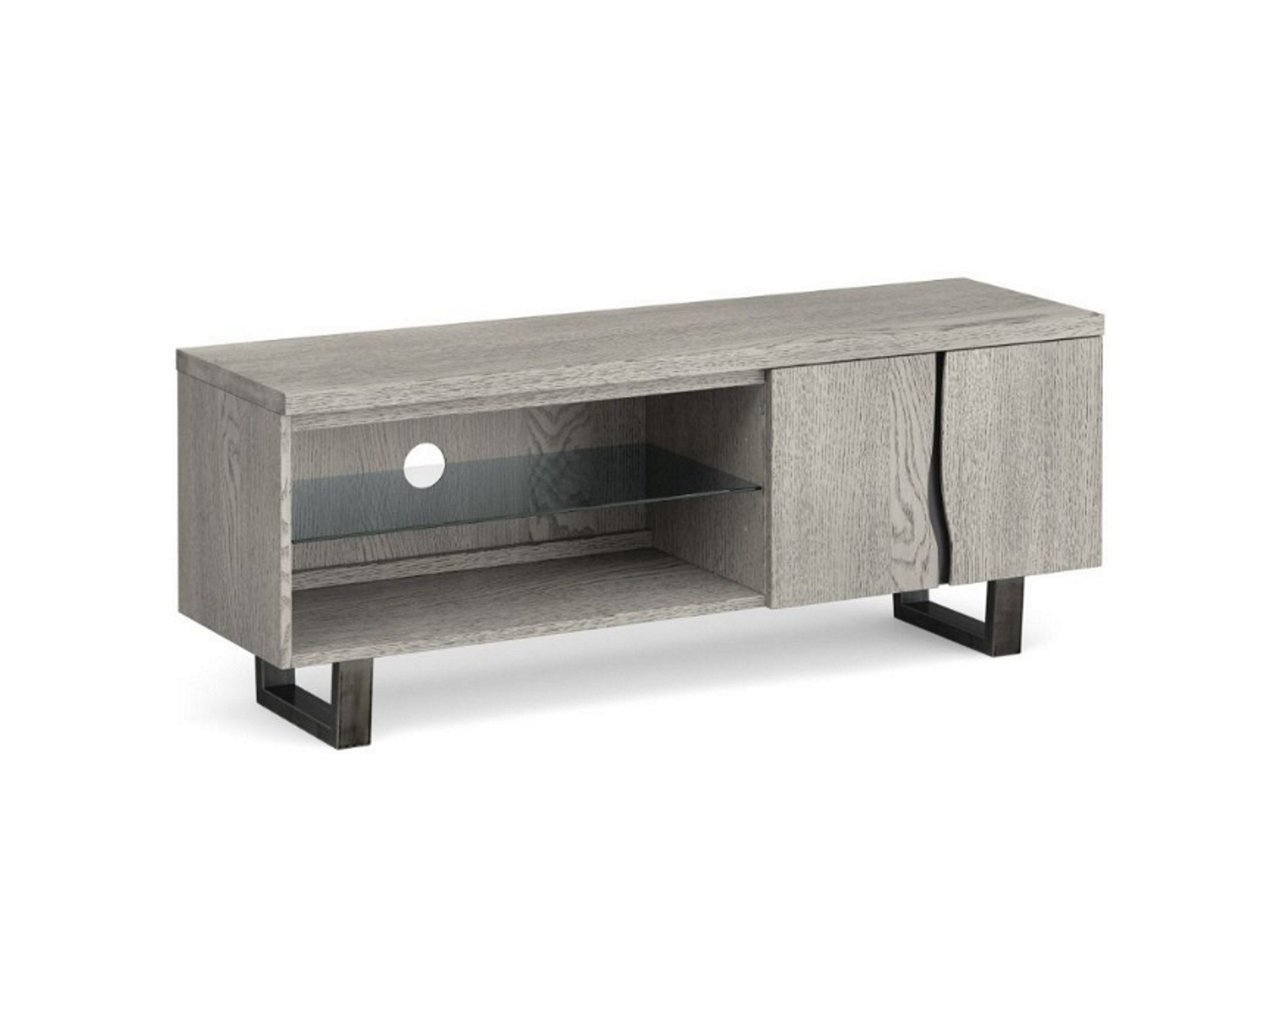 Brooklyn Living and Dining Range - Large TV Unit